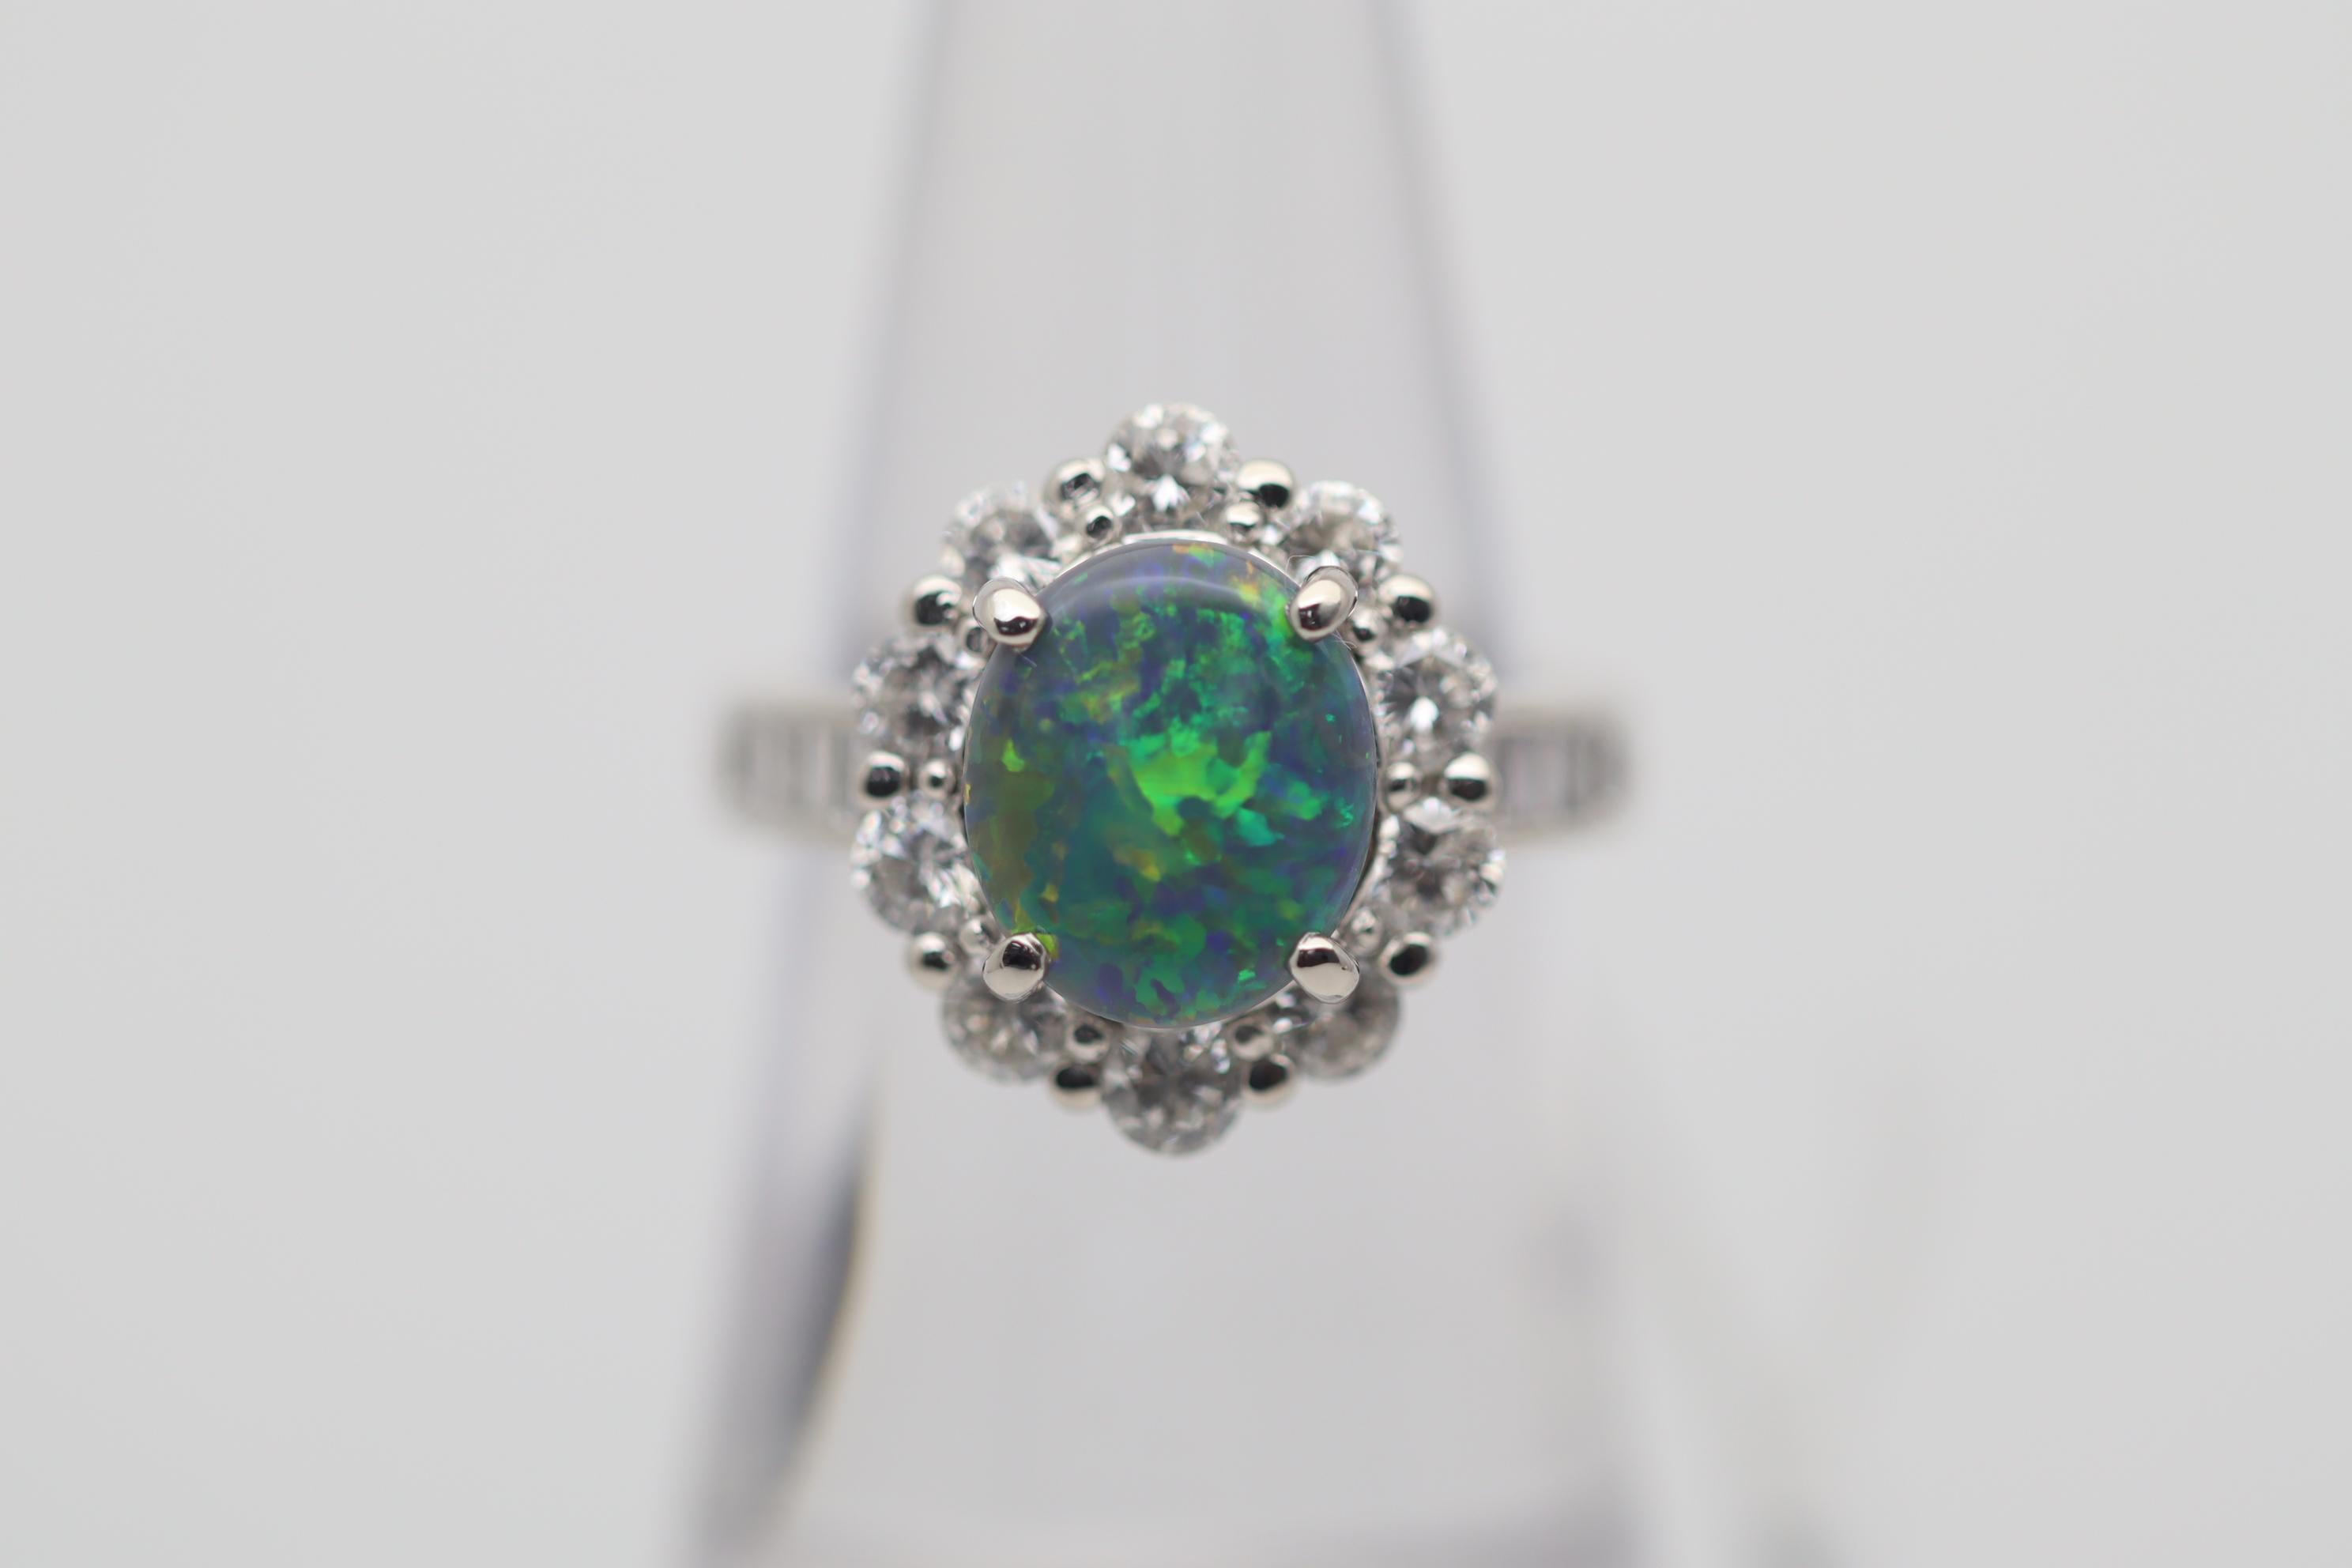 A fine natural black opal from Australia takes center stage. It weighs 1.84 carats and has great play-of-color as large bright flashes of green, orange, and yellow dance across the stone along with some blues and reds. It is complemented by 1.24